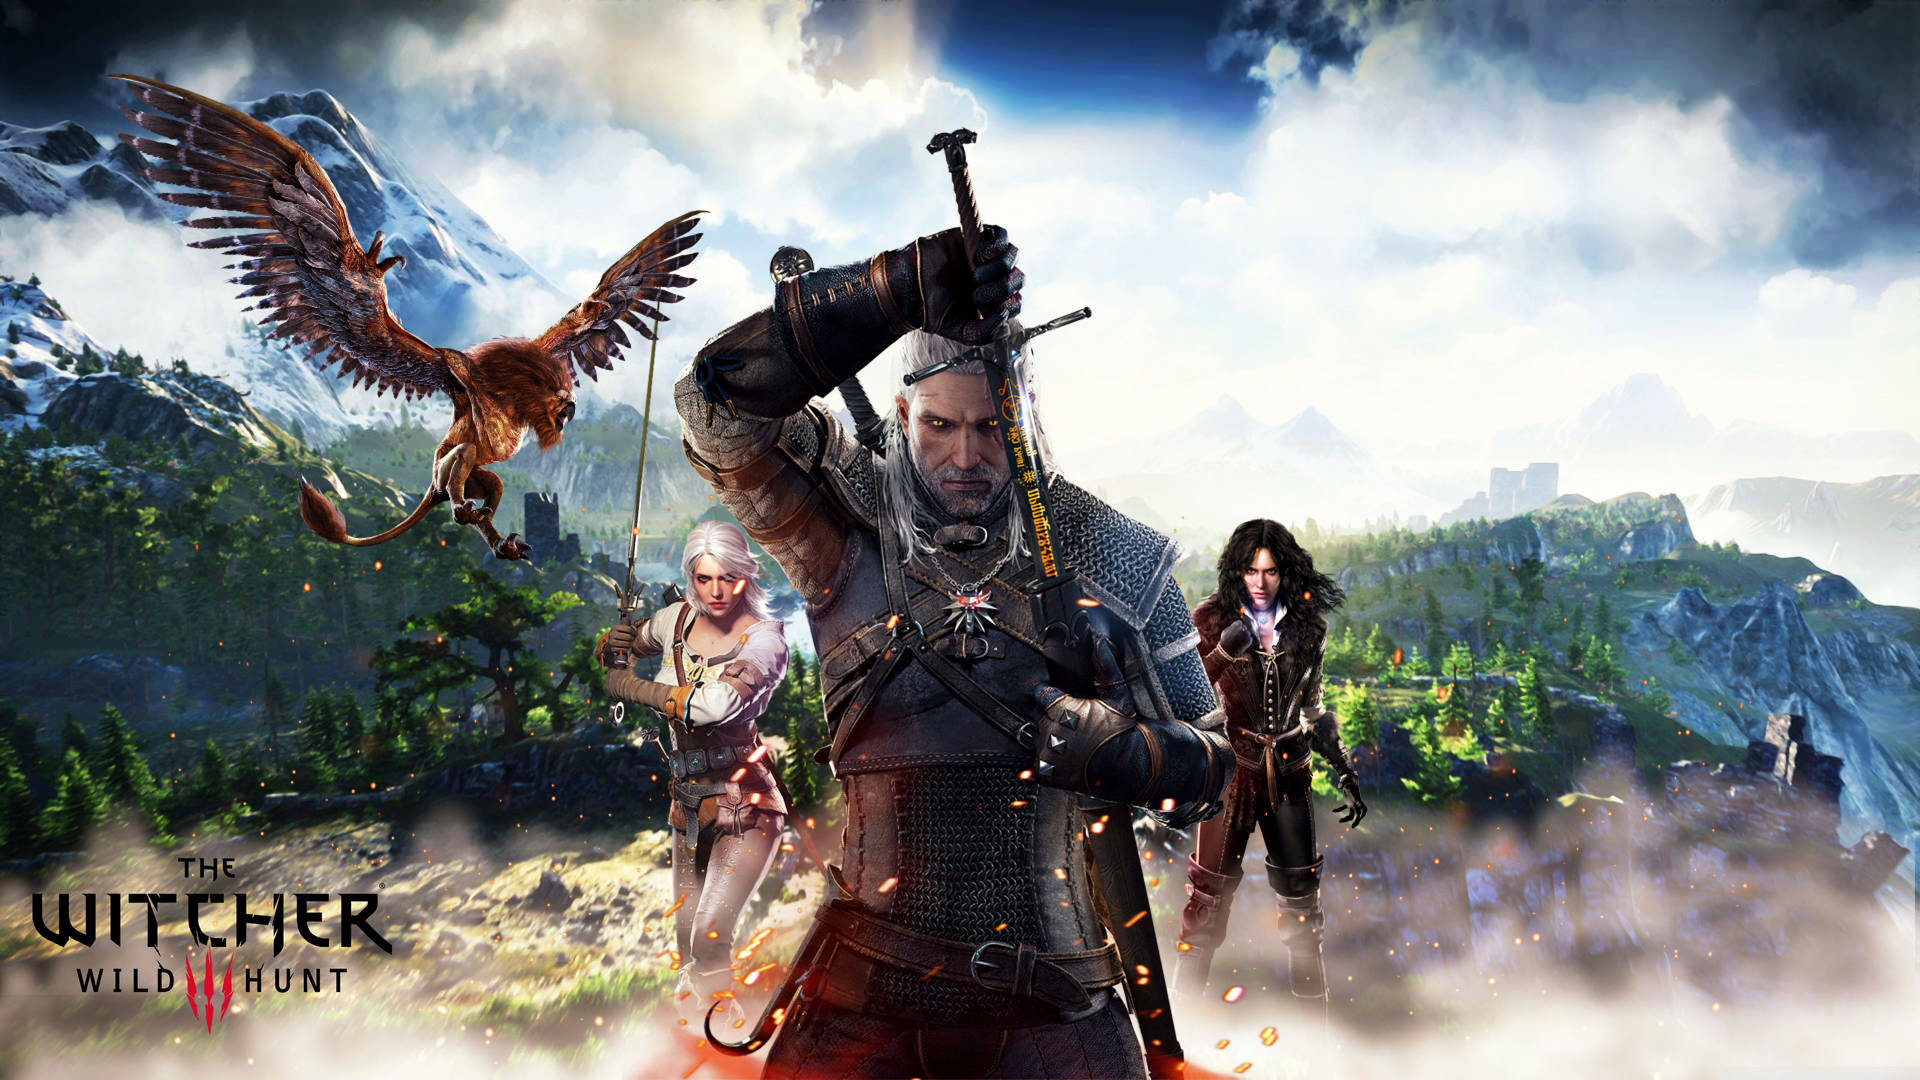 The Witcher Wild Hunt Poster Background